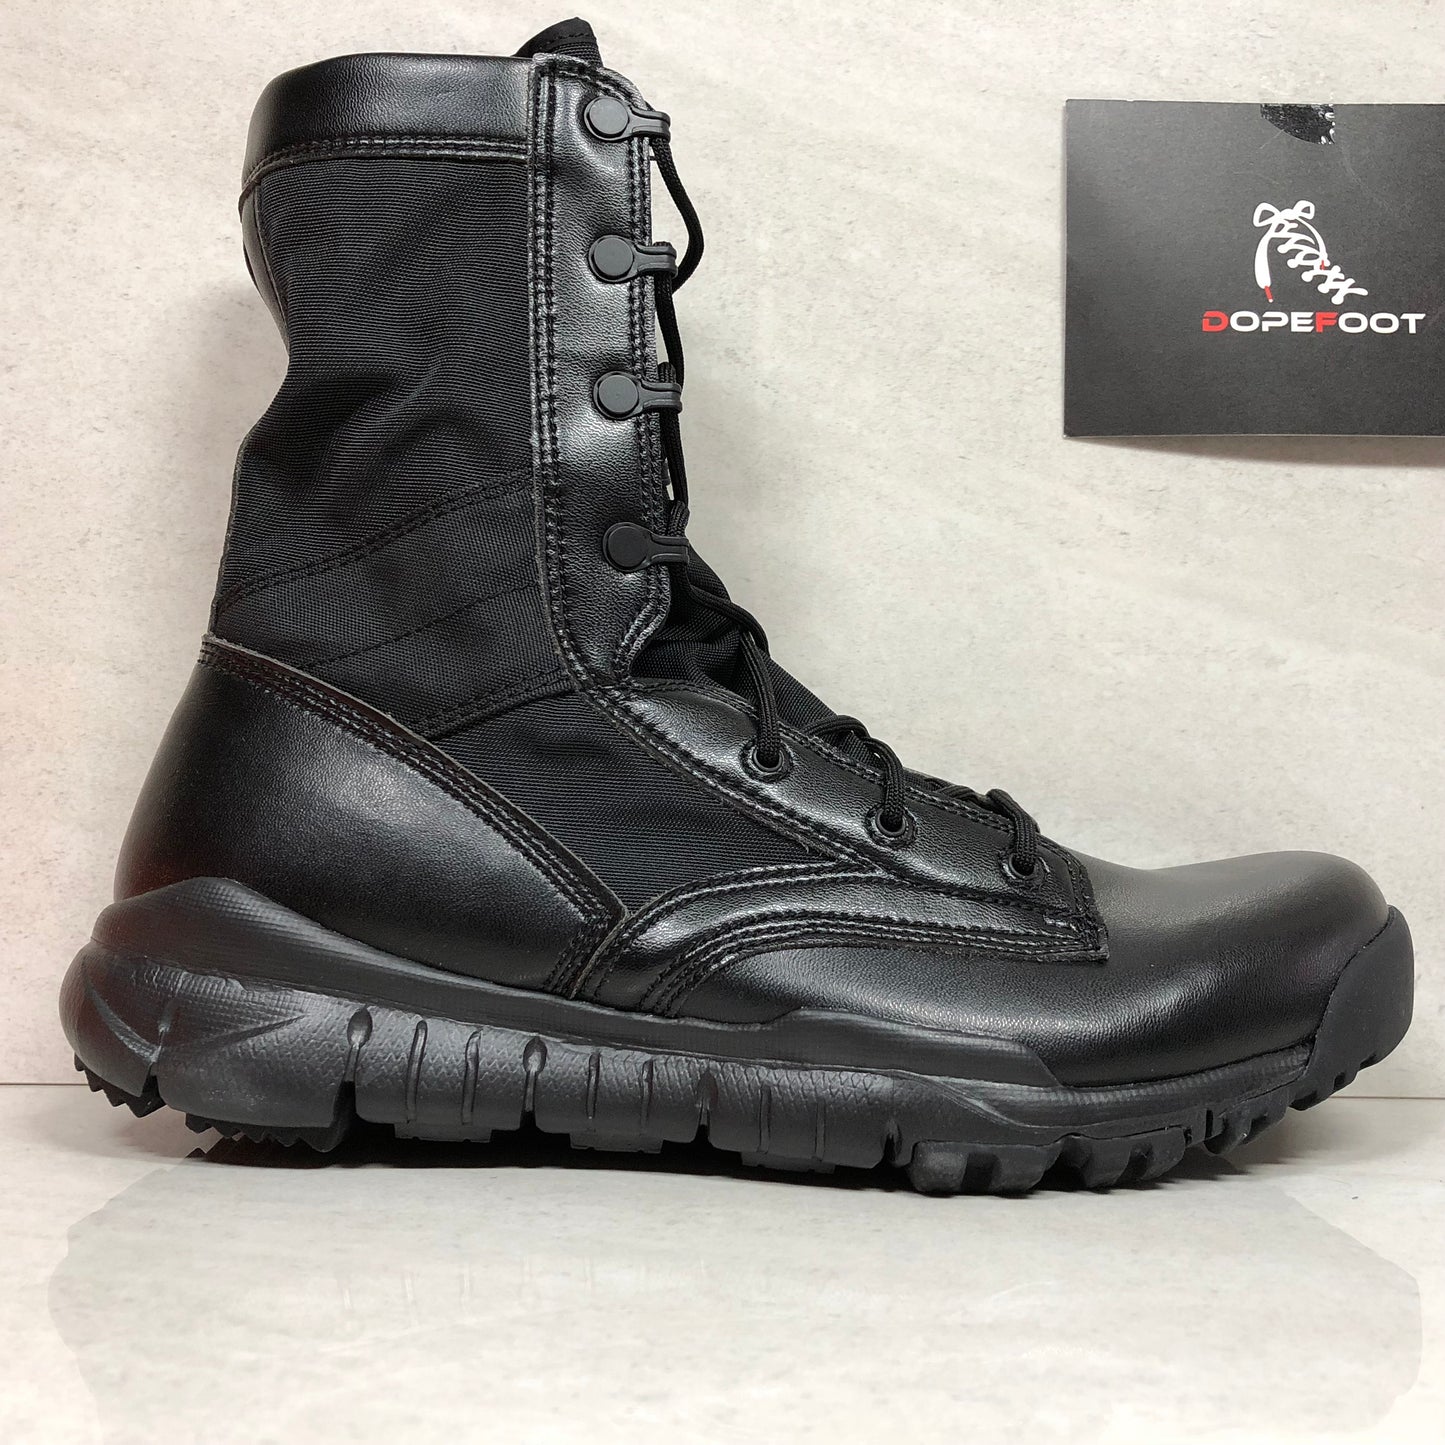 Nike SFB 6" Black Leather Special Field Police Tactical Men's Boots 329798-002